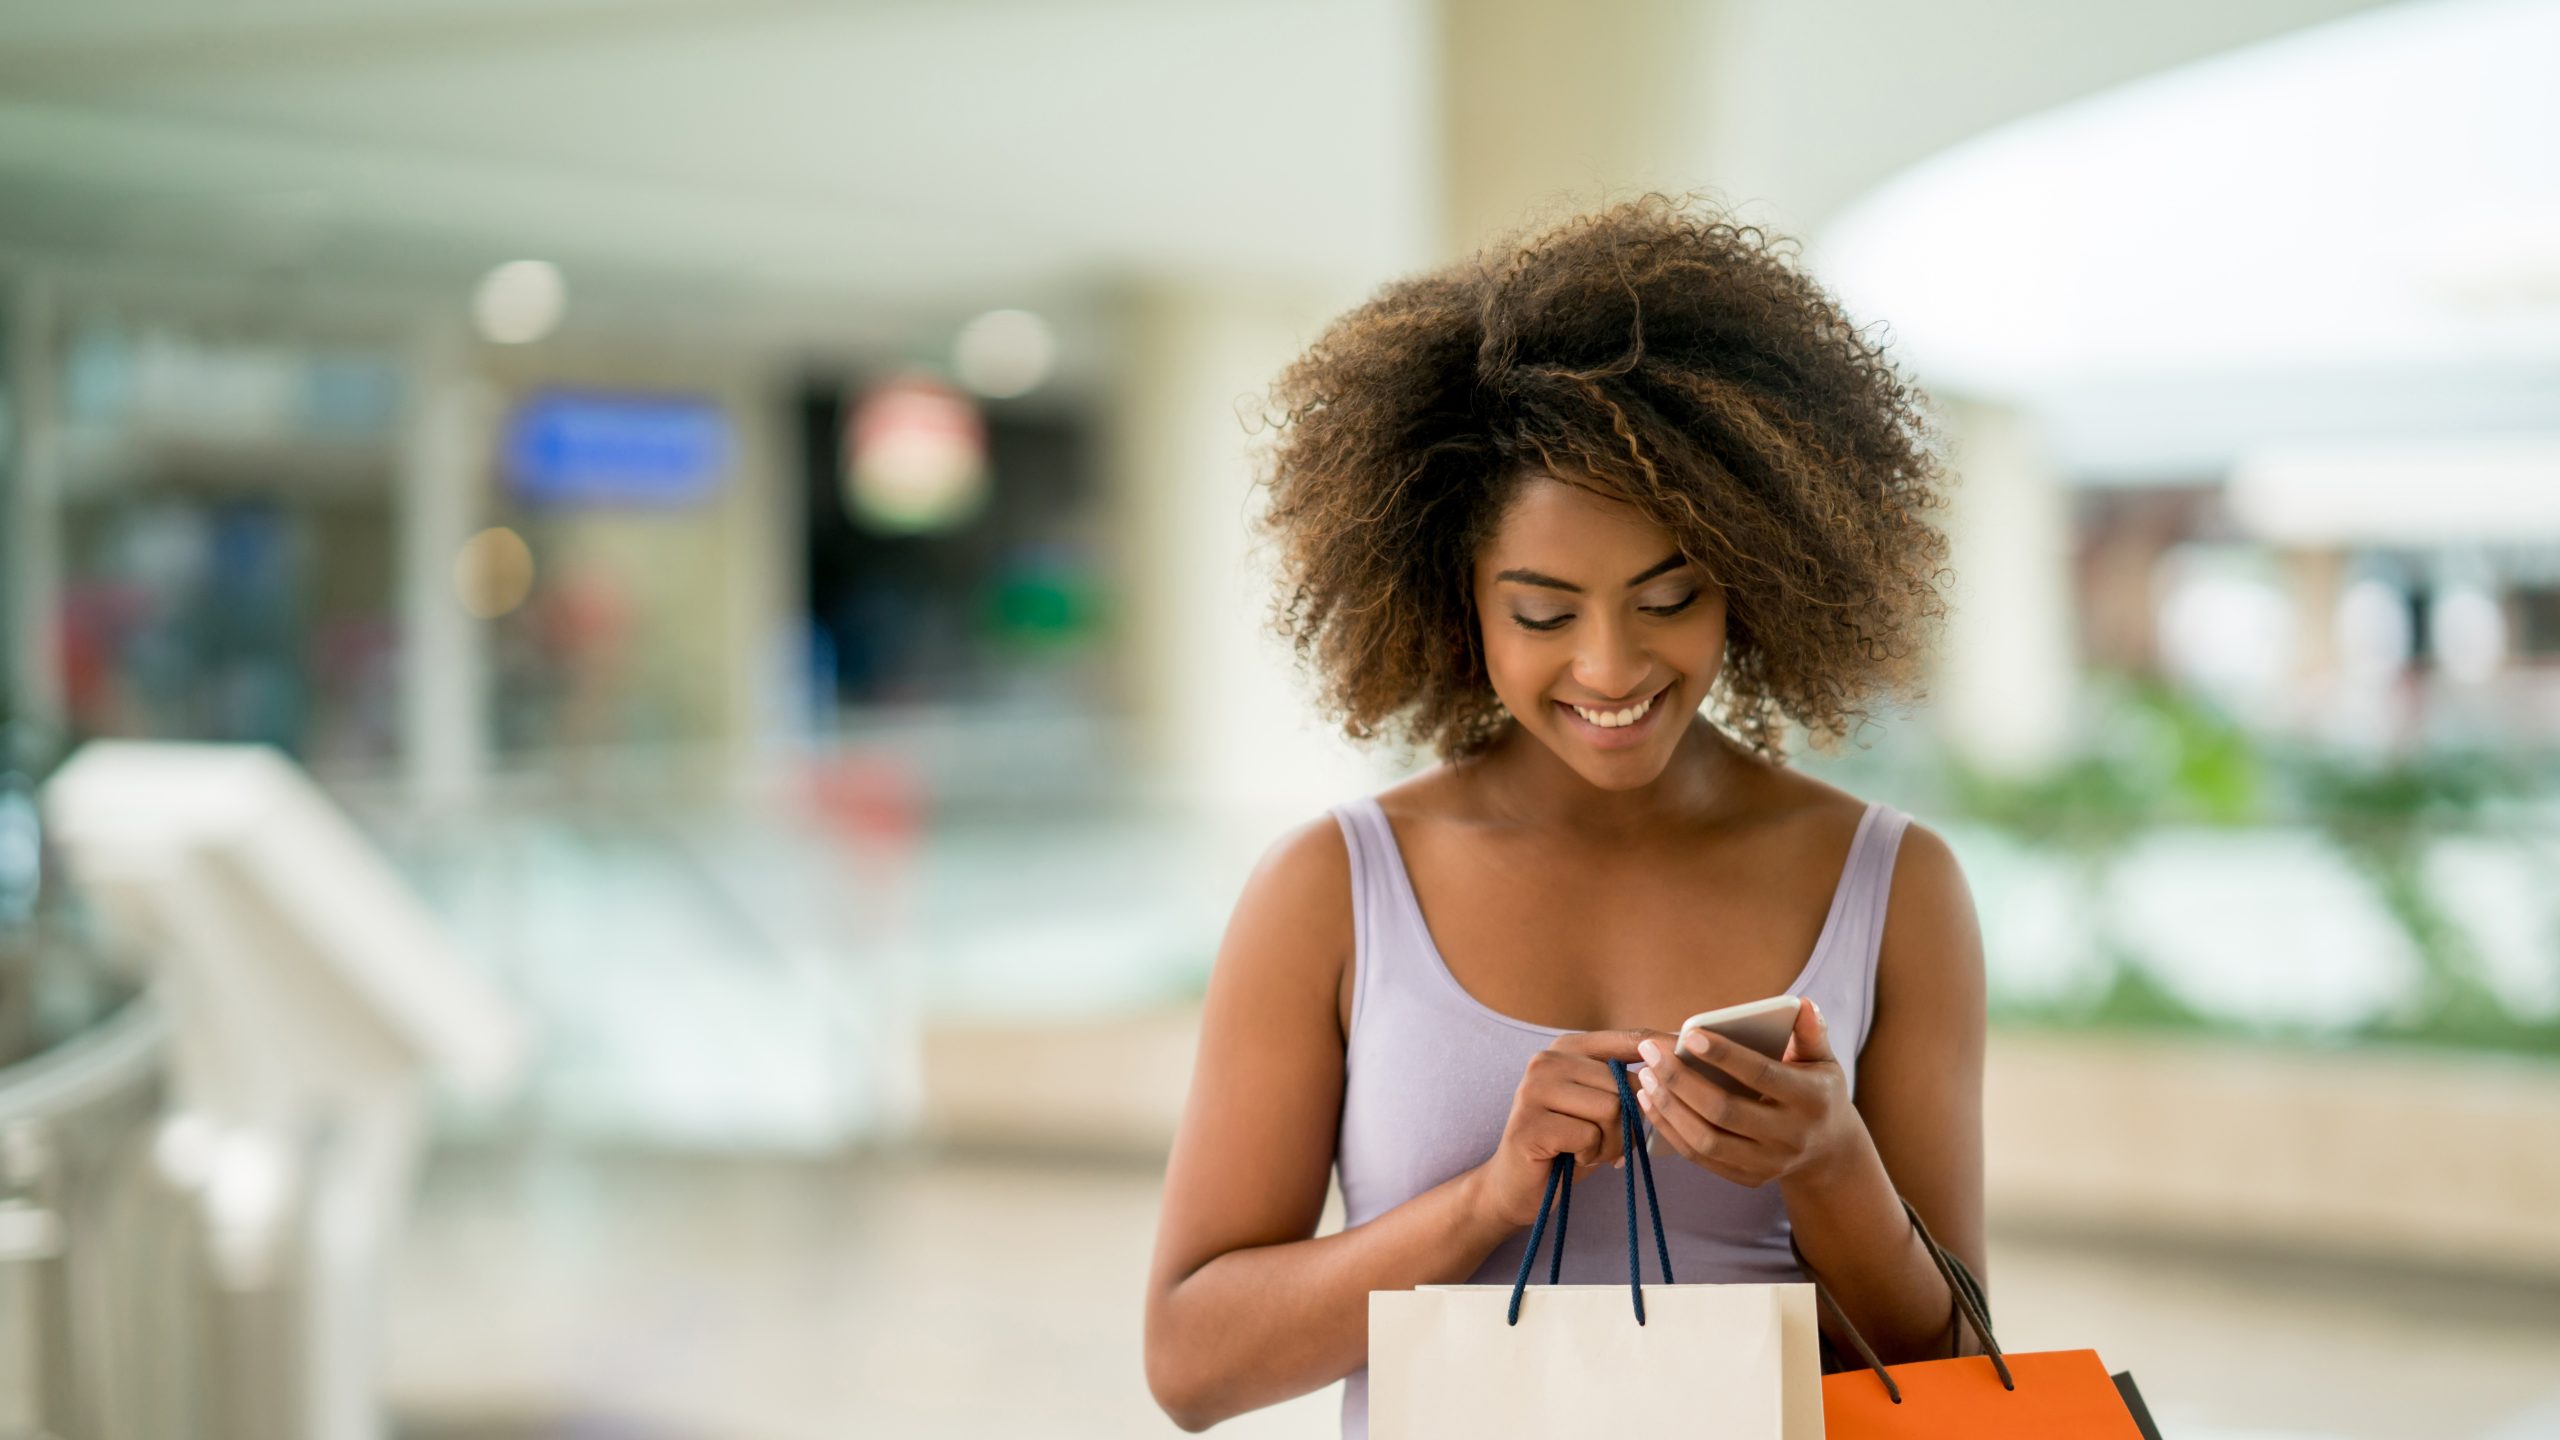 A happy woman with curly hair, holding shopping bags and looking at her phone, standing in a sunlit, modern mall.